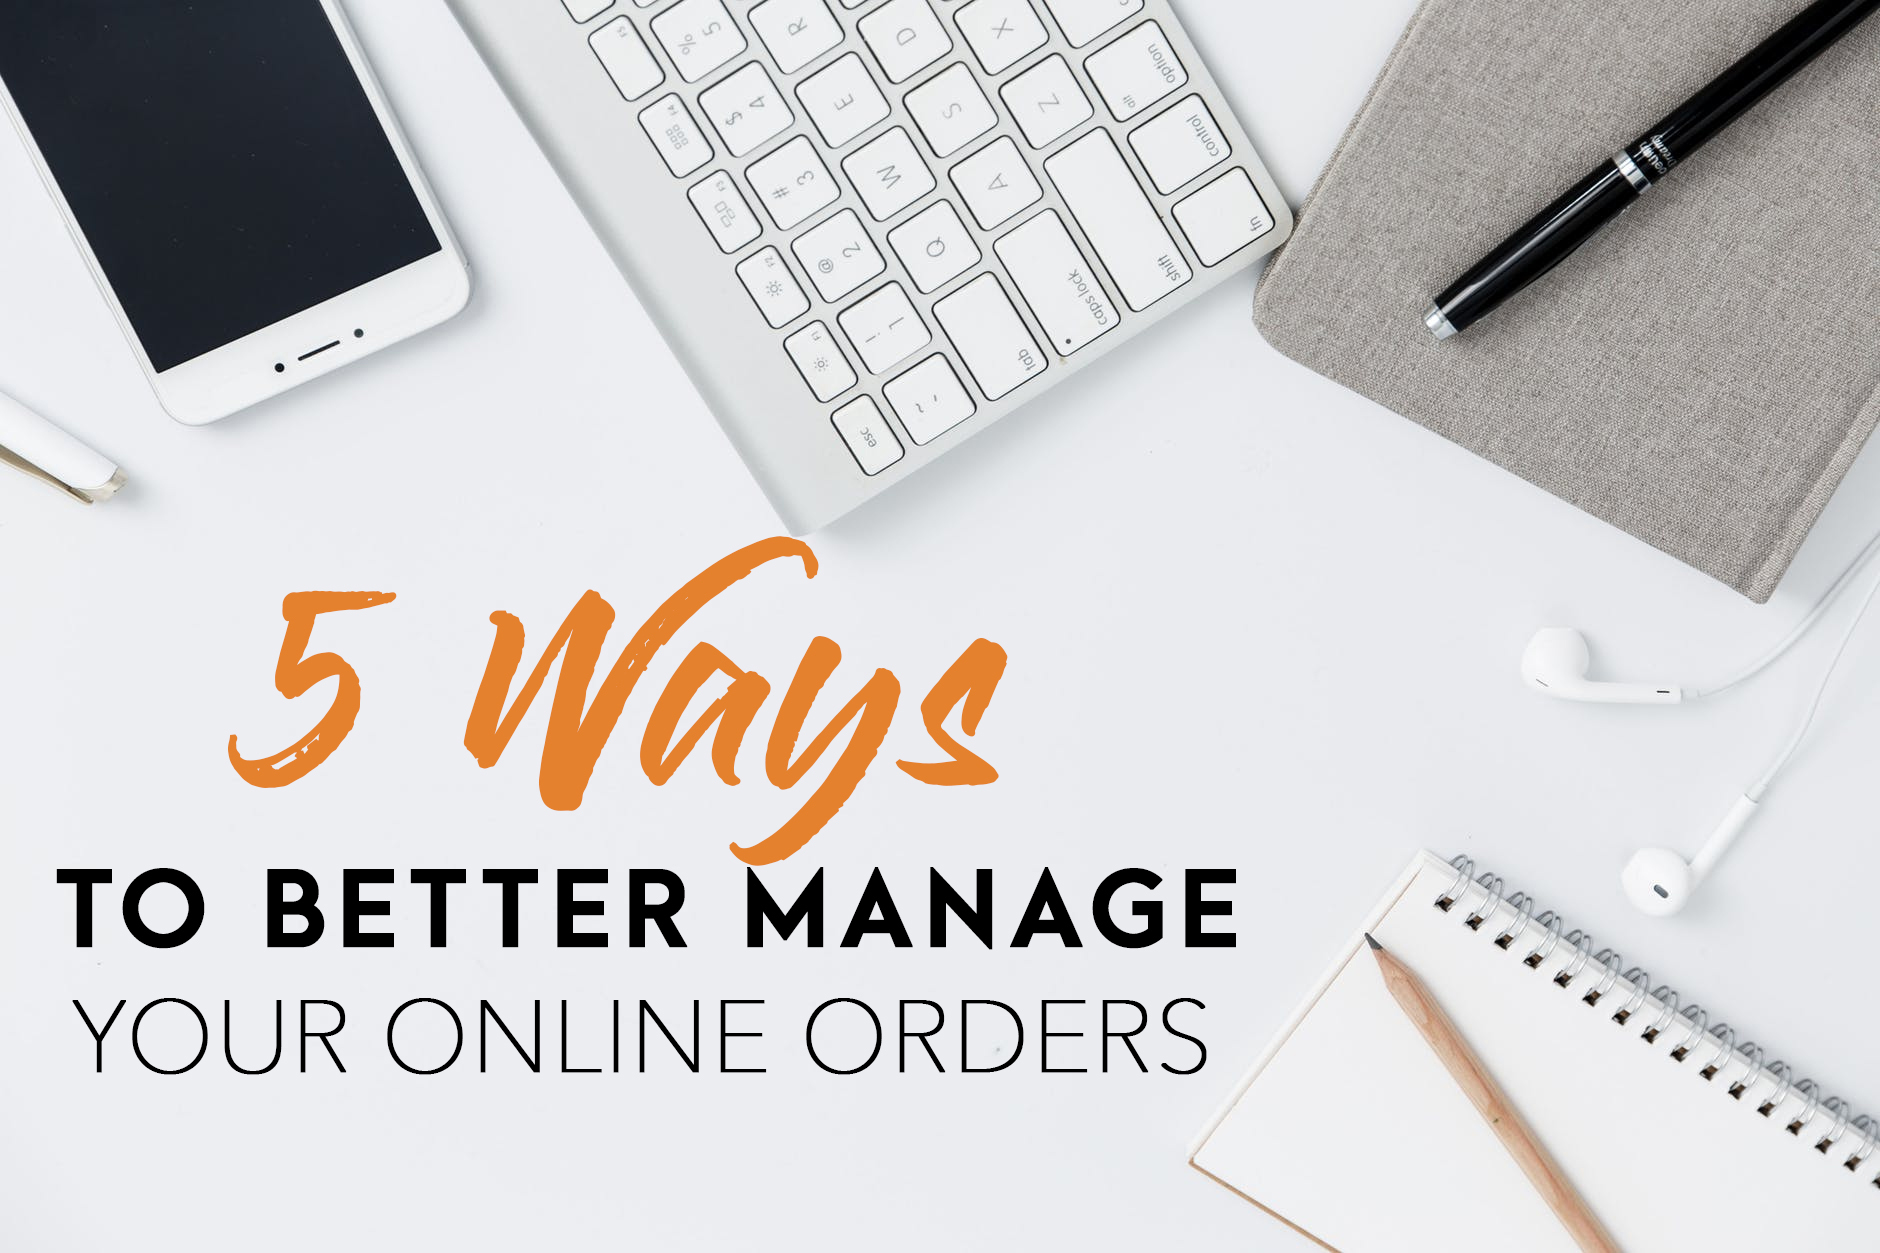 5 Ways to Better Manage Online Orders At Your Restaurant